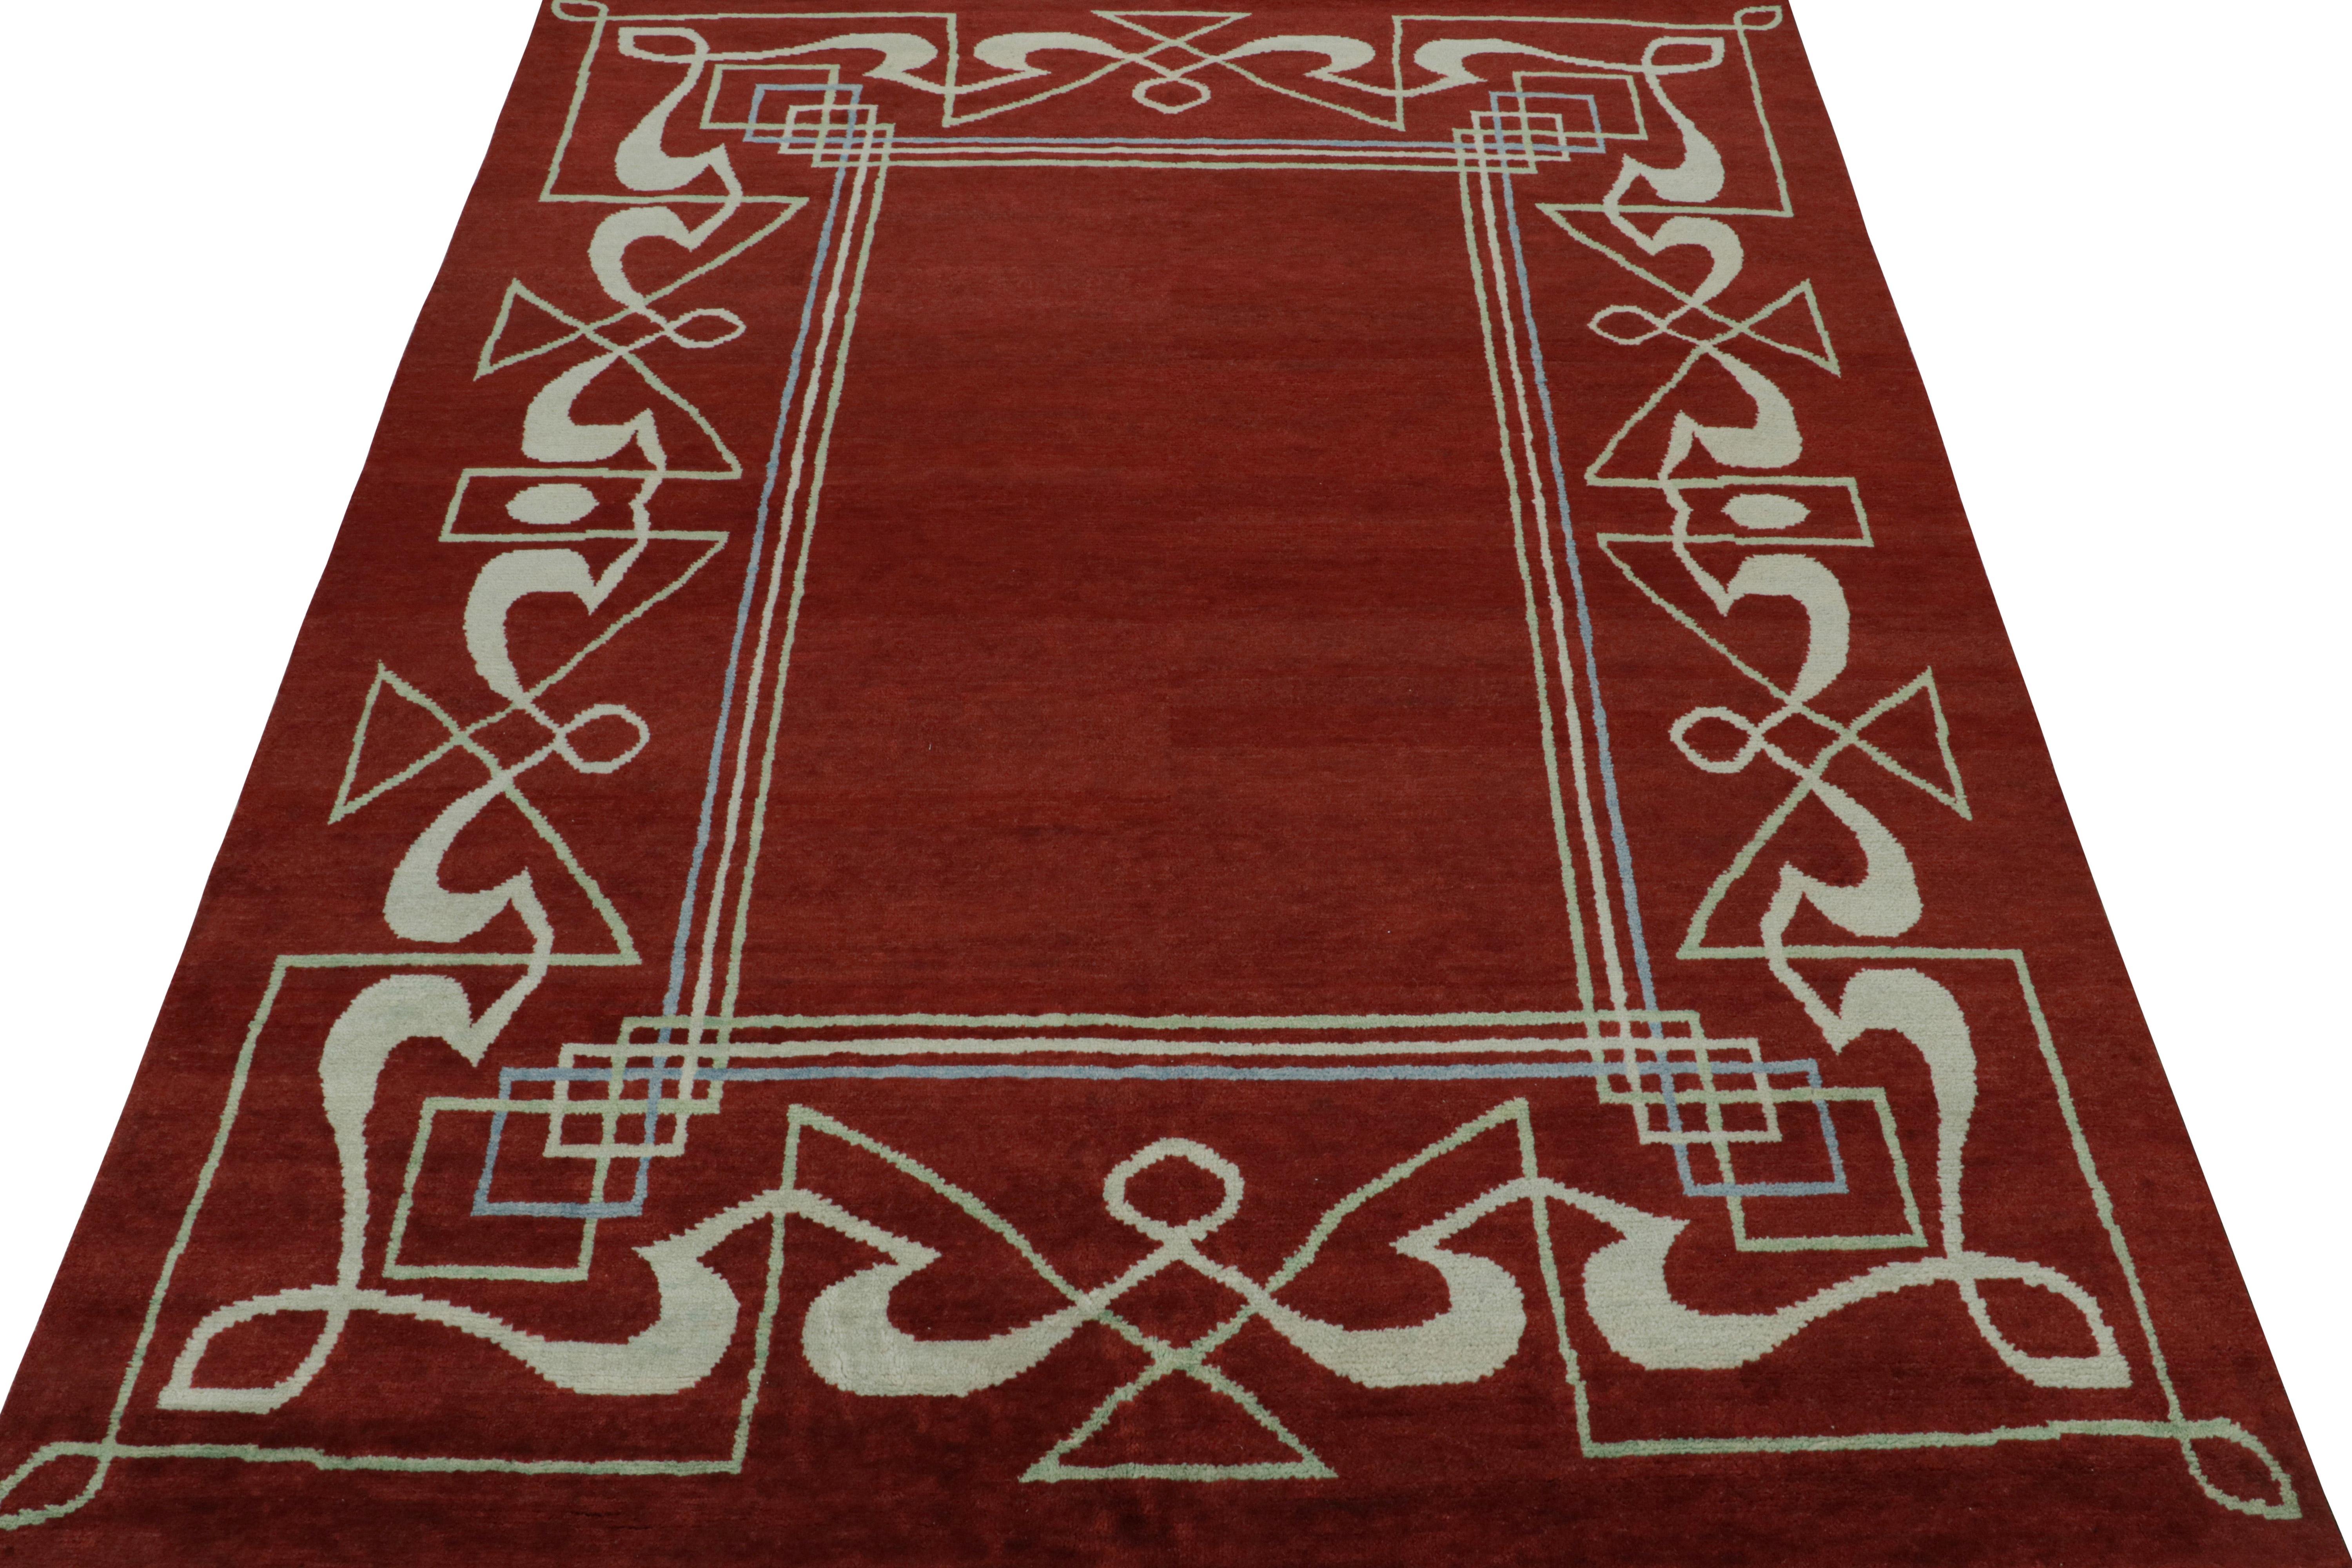 Indian Rug & Kilim’s French Style Art Deco Rug in Red & White Geometric Patterns For Sale